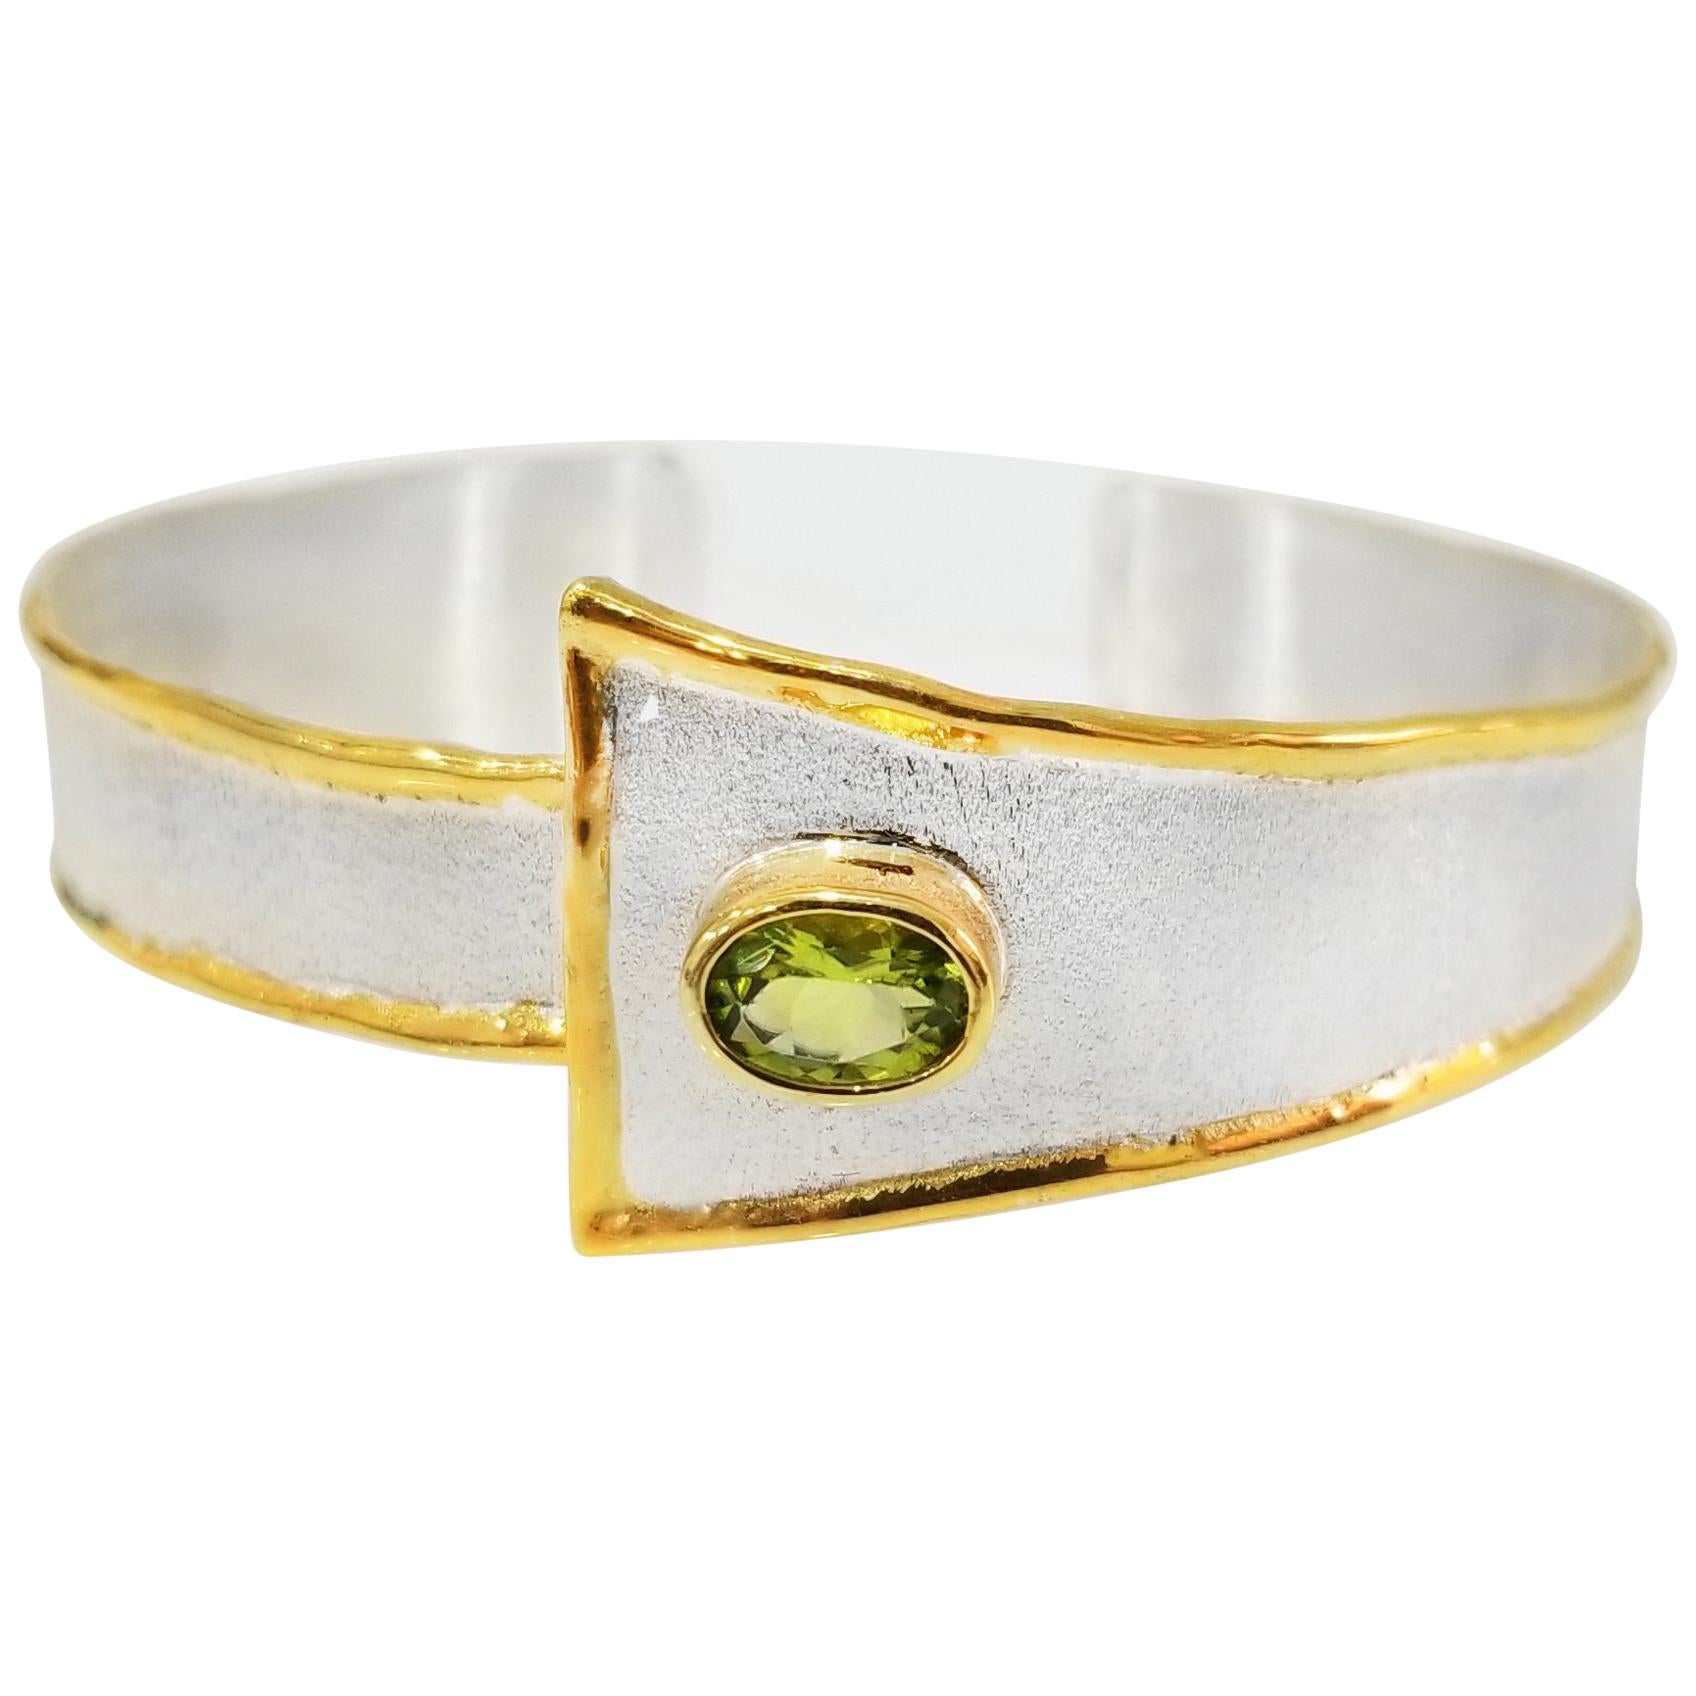 Yianni Creations 1.35 Carat Peridot Fine Silver and 24 Karat Gold Bracelet For Sale